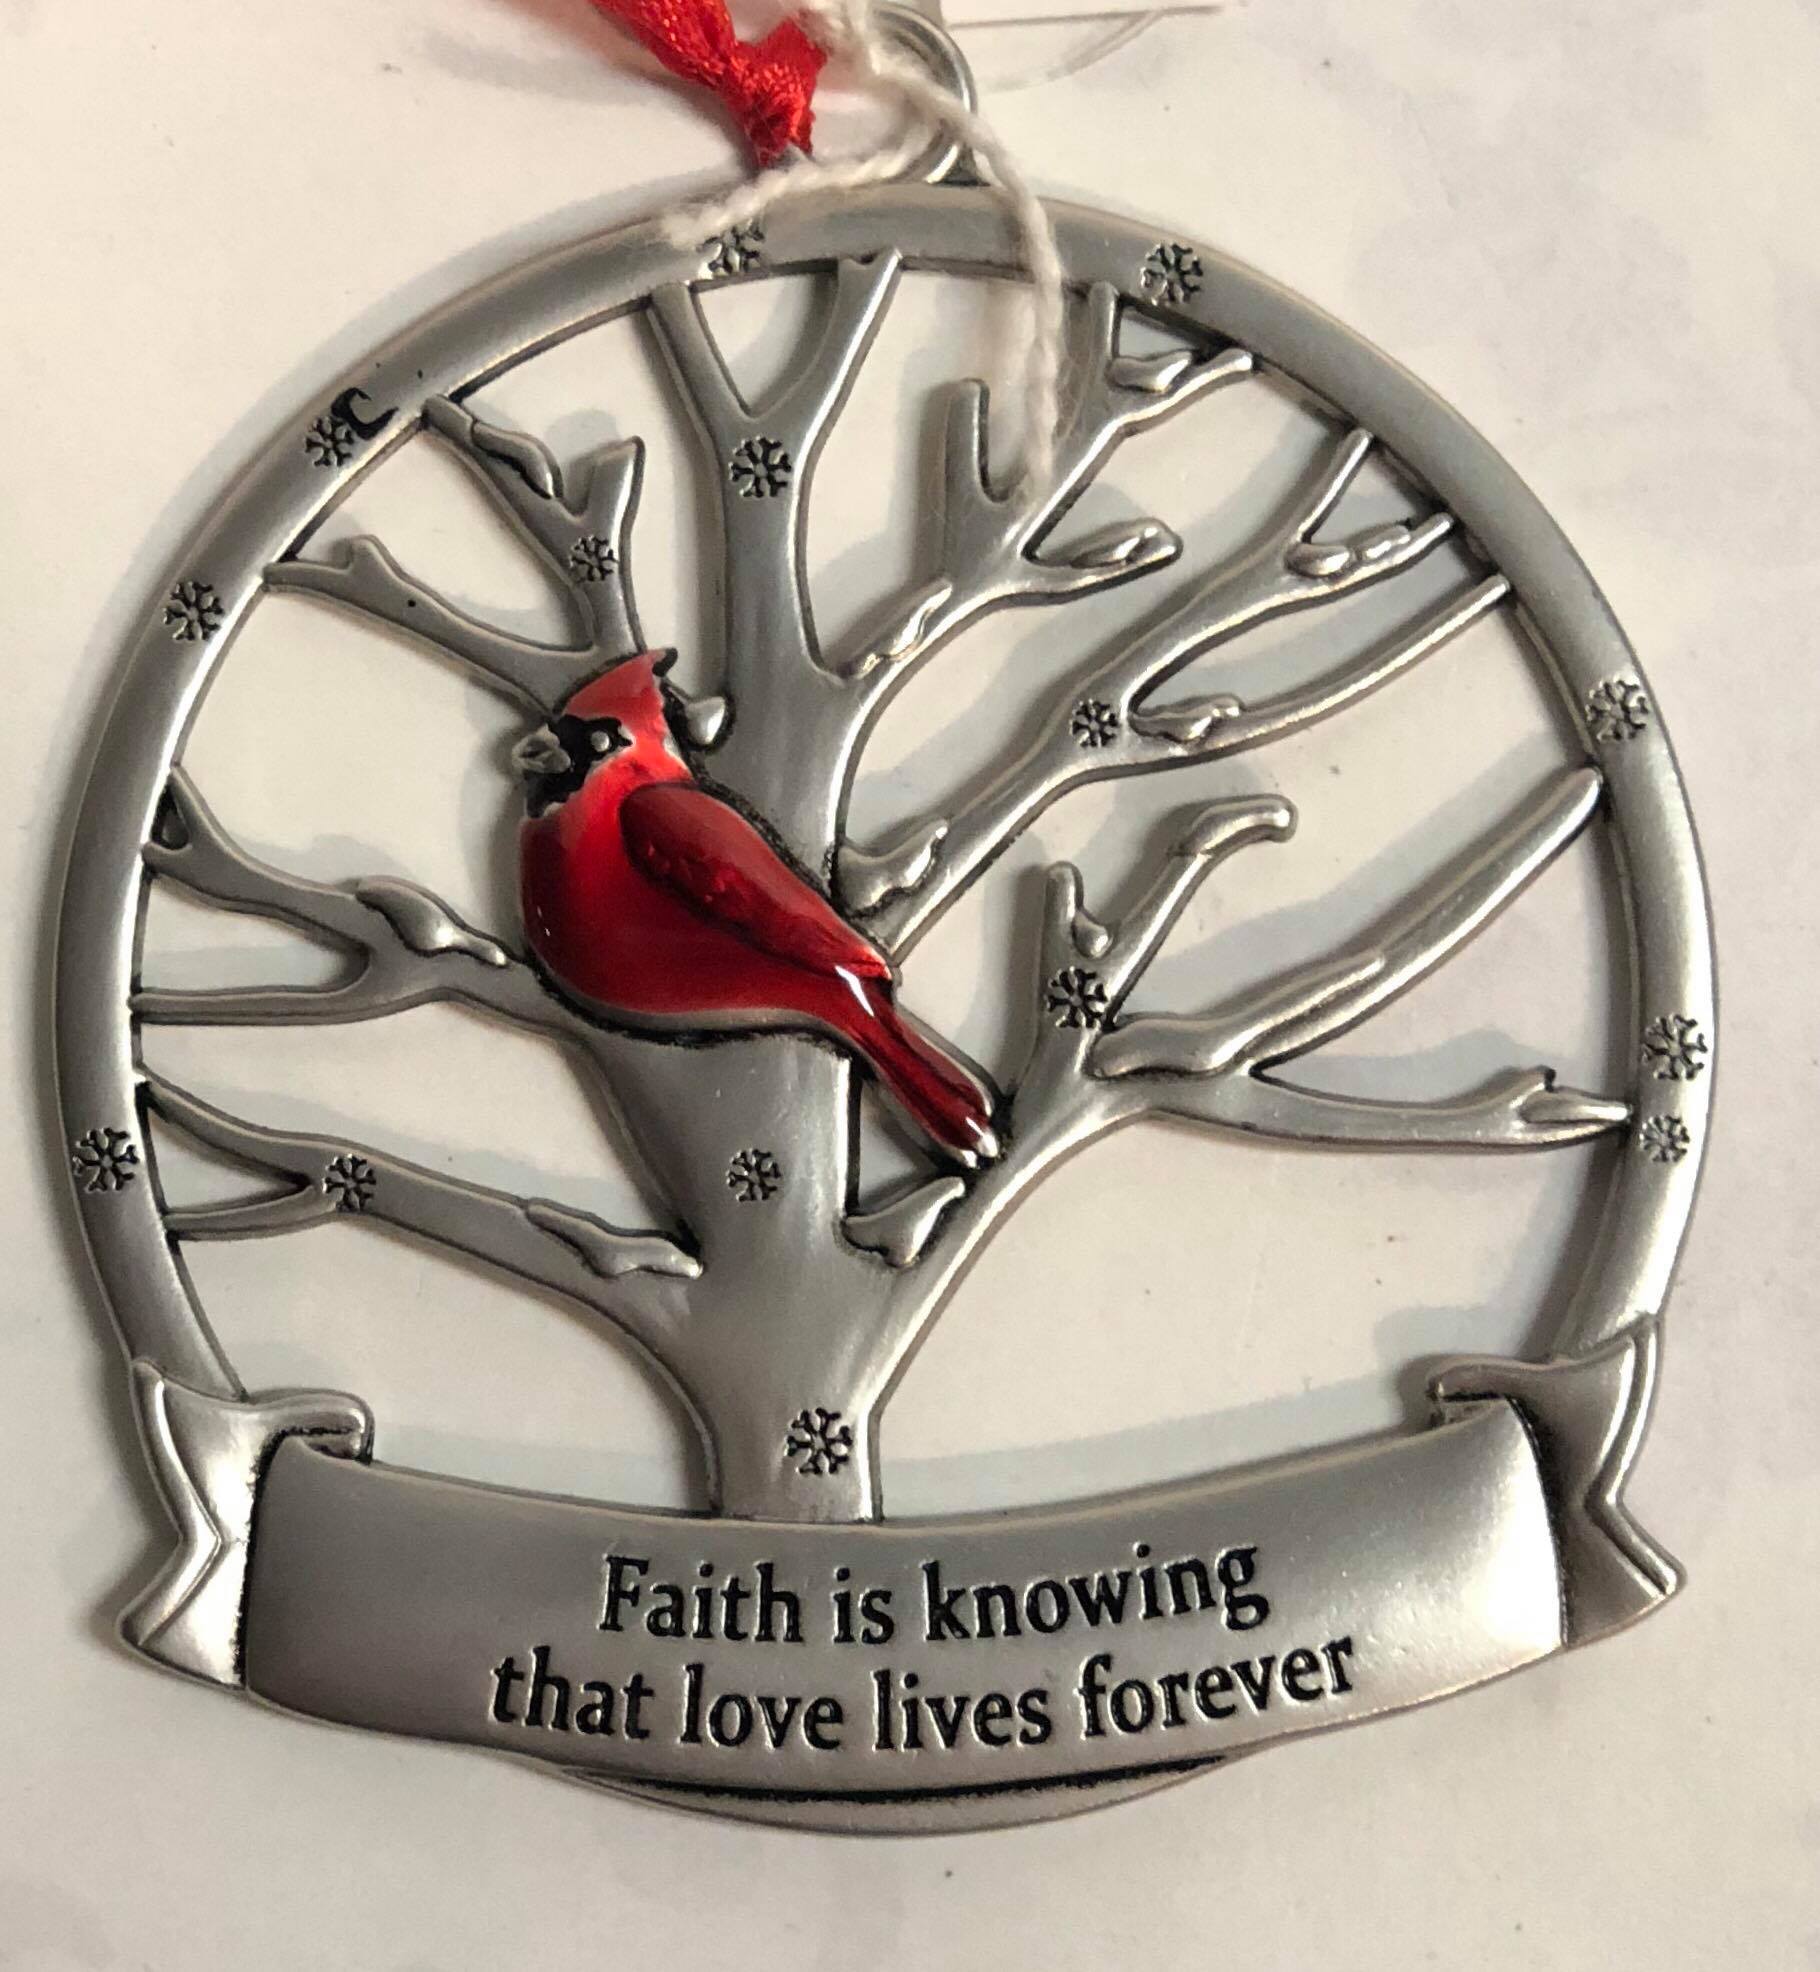 Cardinal Tree Ornament "Faith is knowing that love lives forever"